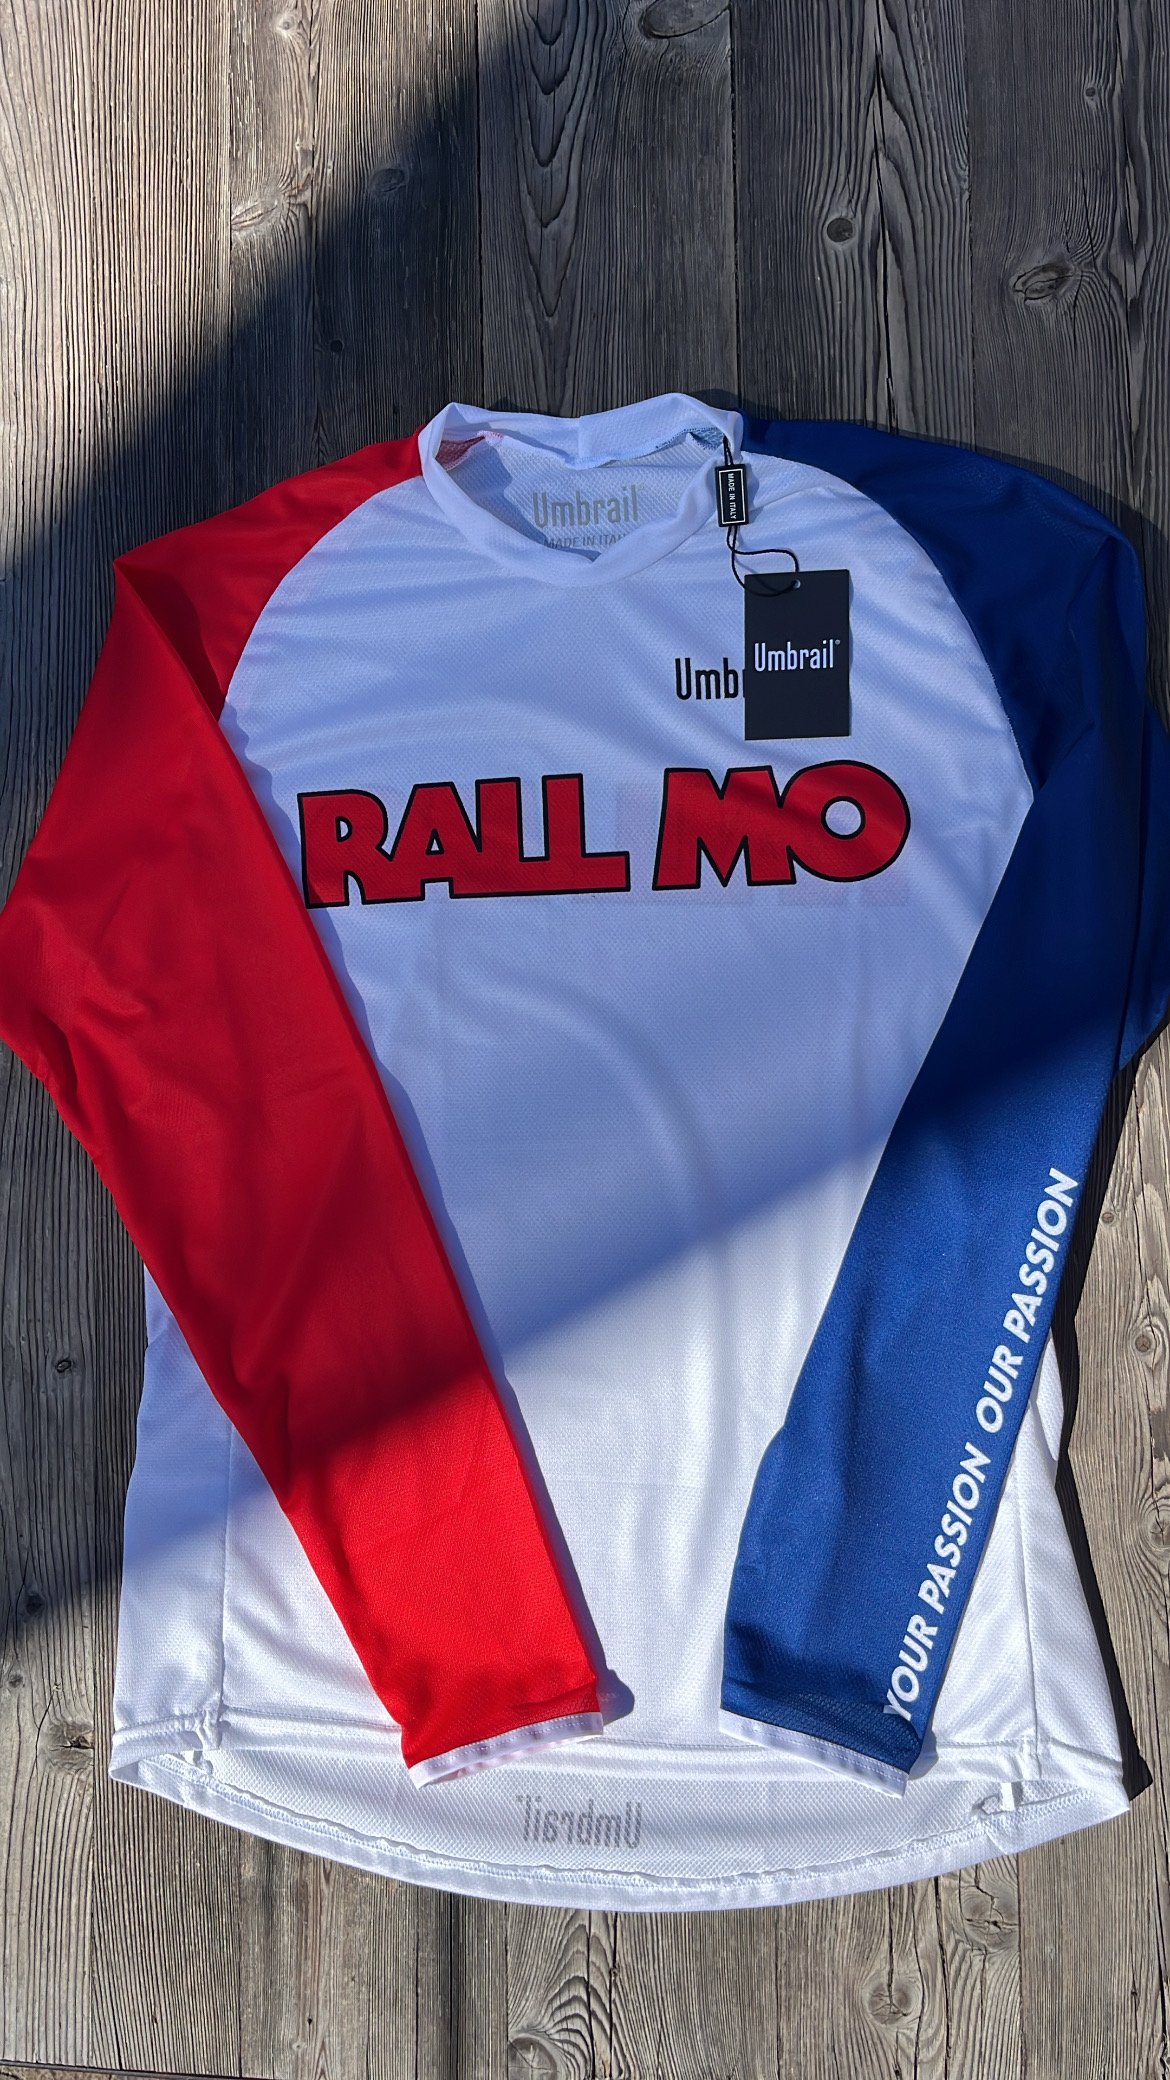 LONG SLEEVE JERSEY  RIDE RALL MO WHITE